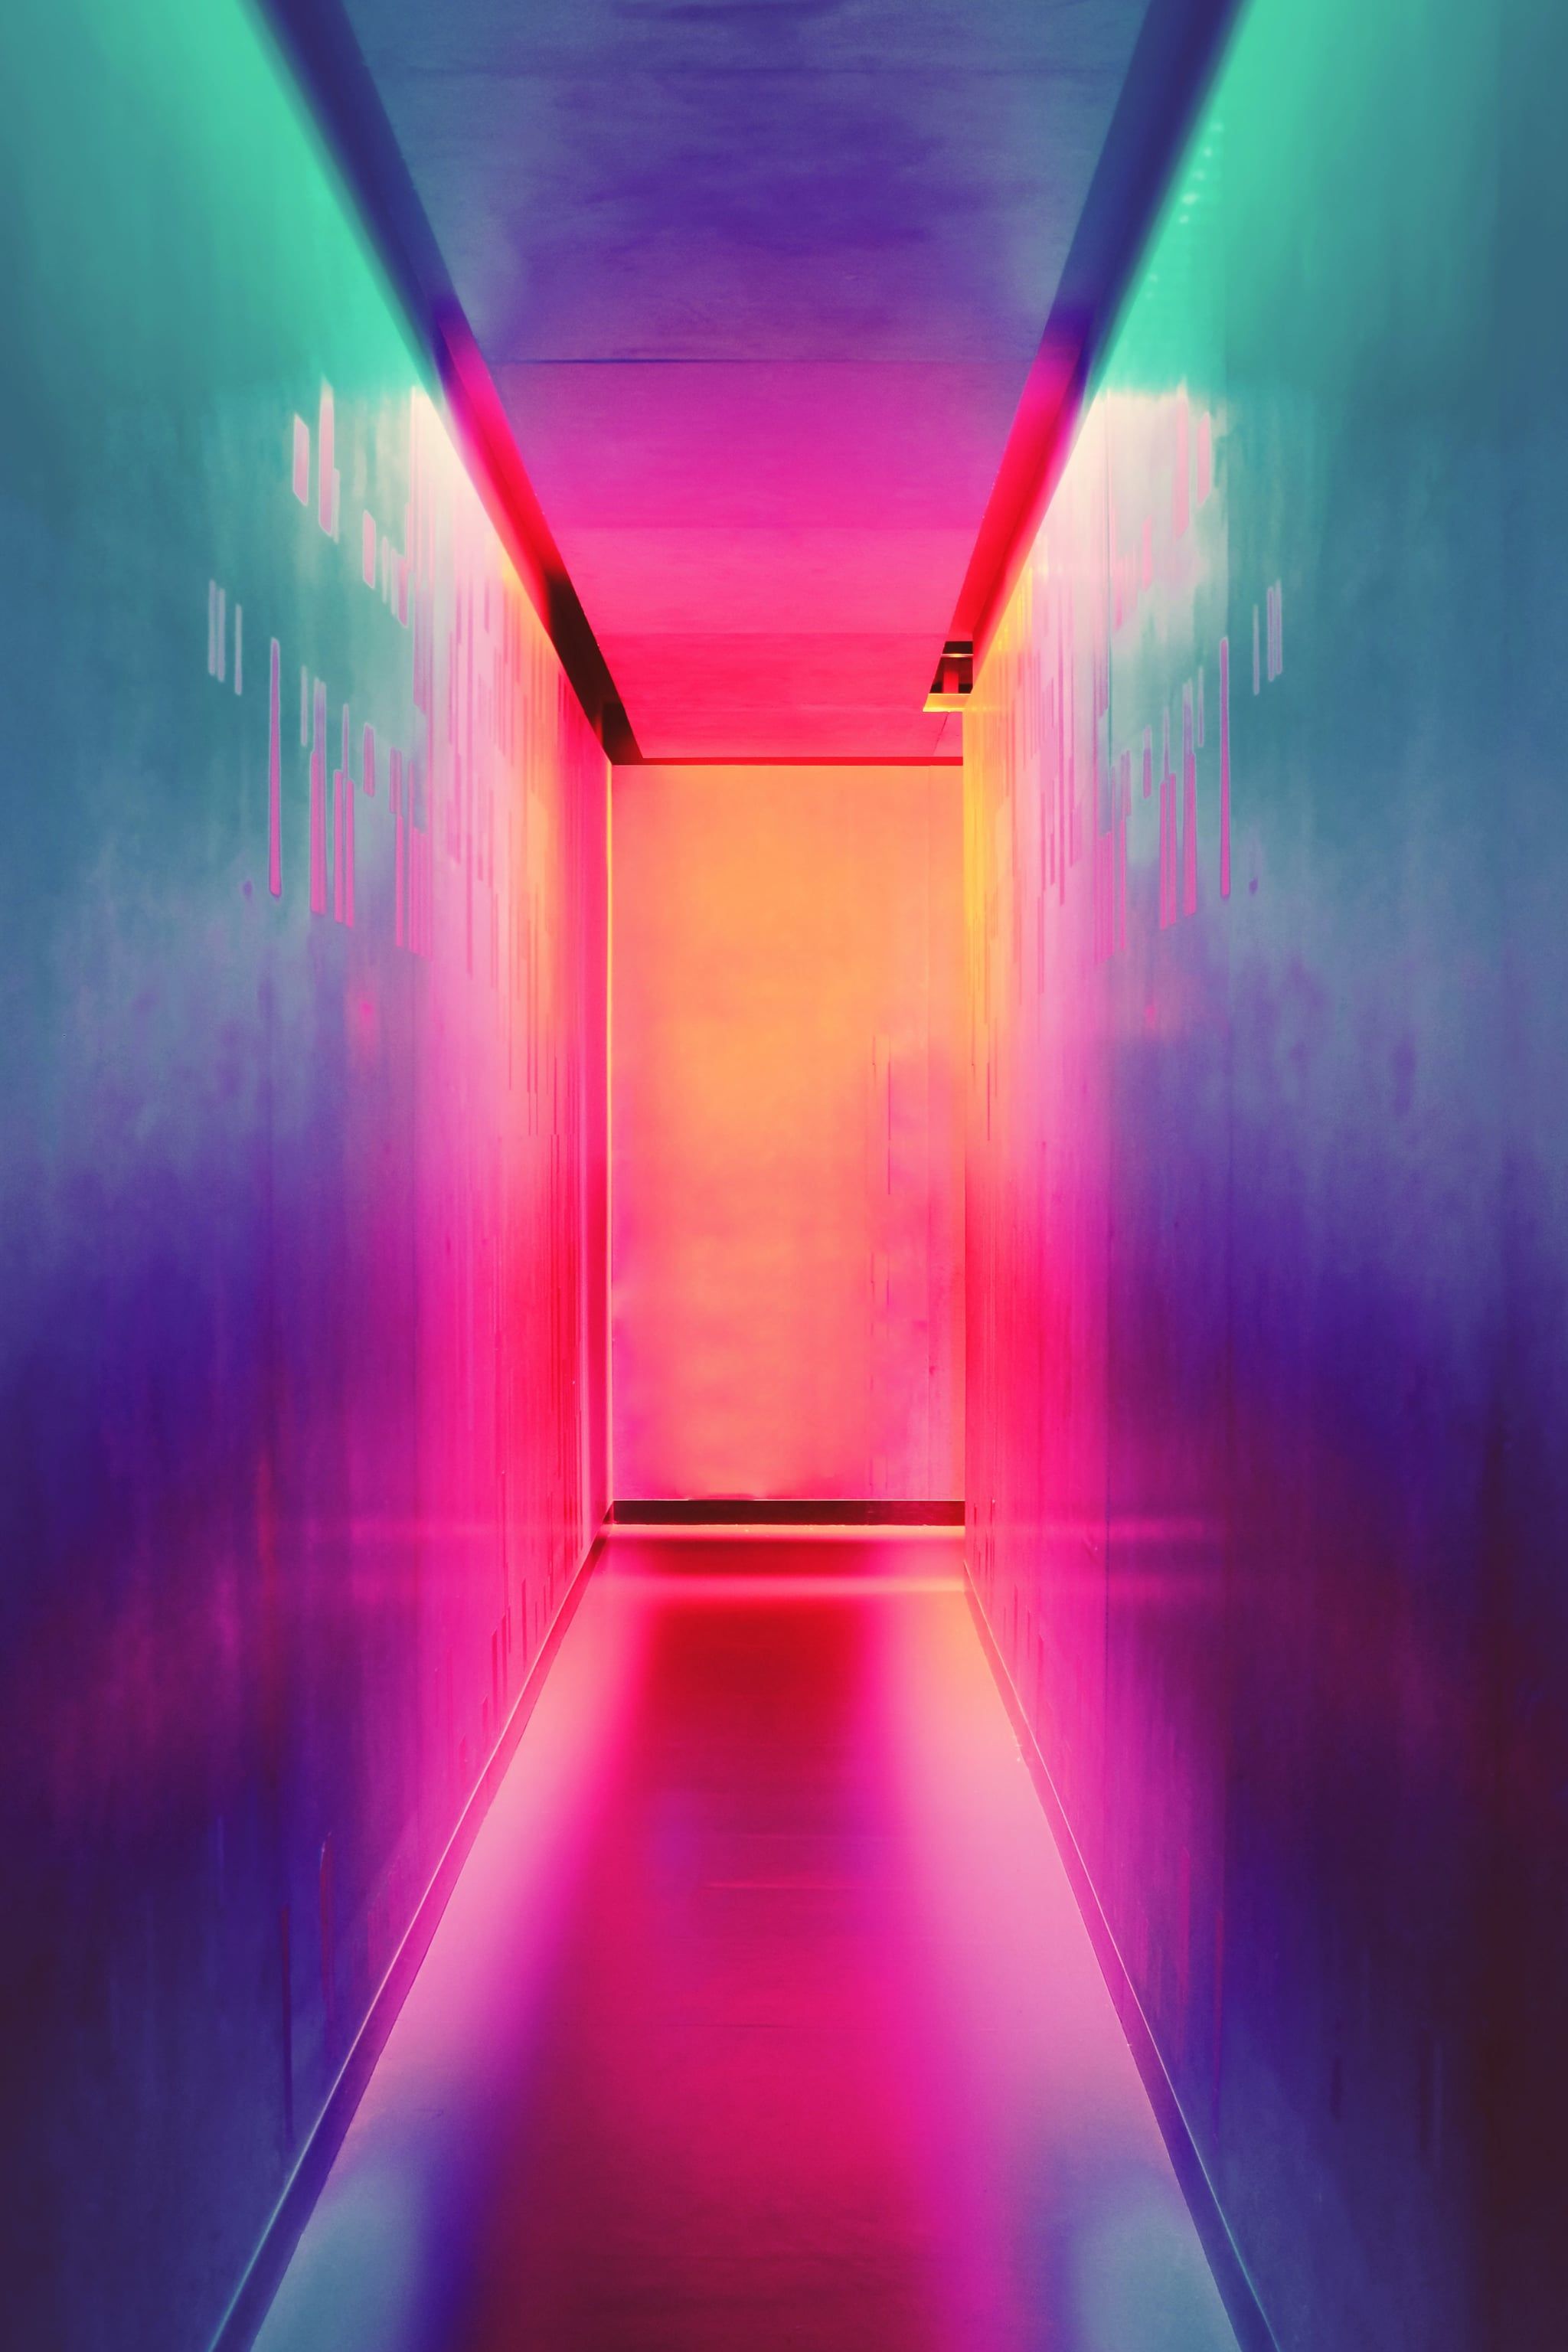 Neon Room iPhone Wallpaper. The Best Wallpaper Ideas That'll Make Your Phone Look Aesthetically Pleasing AF